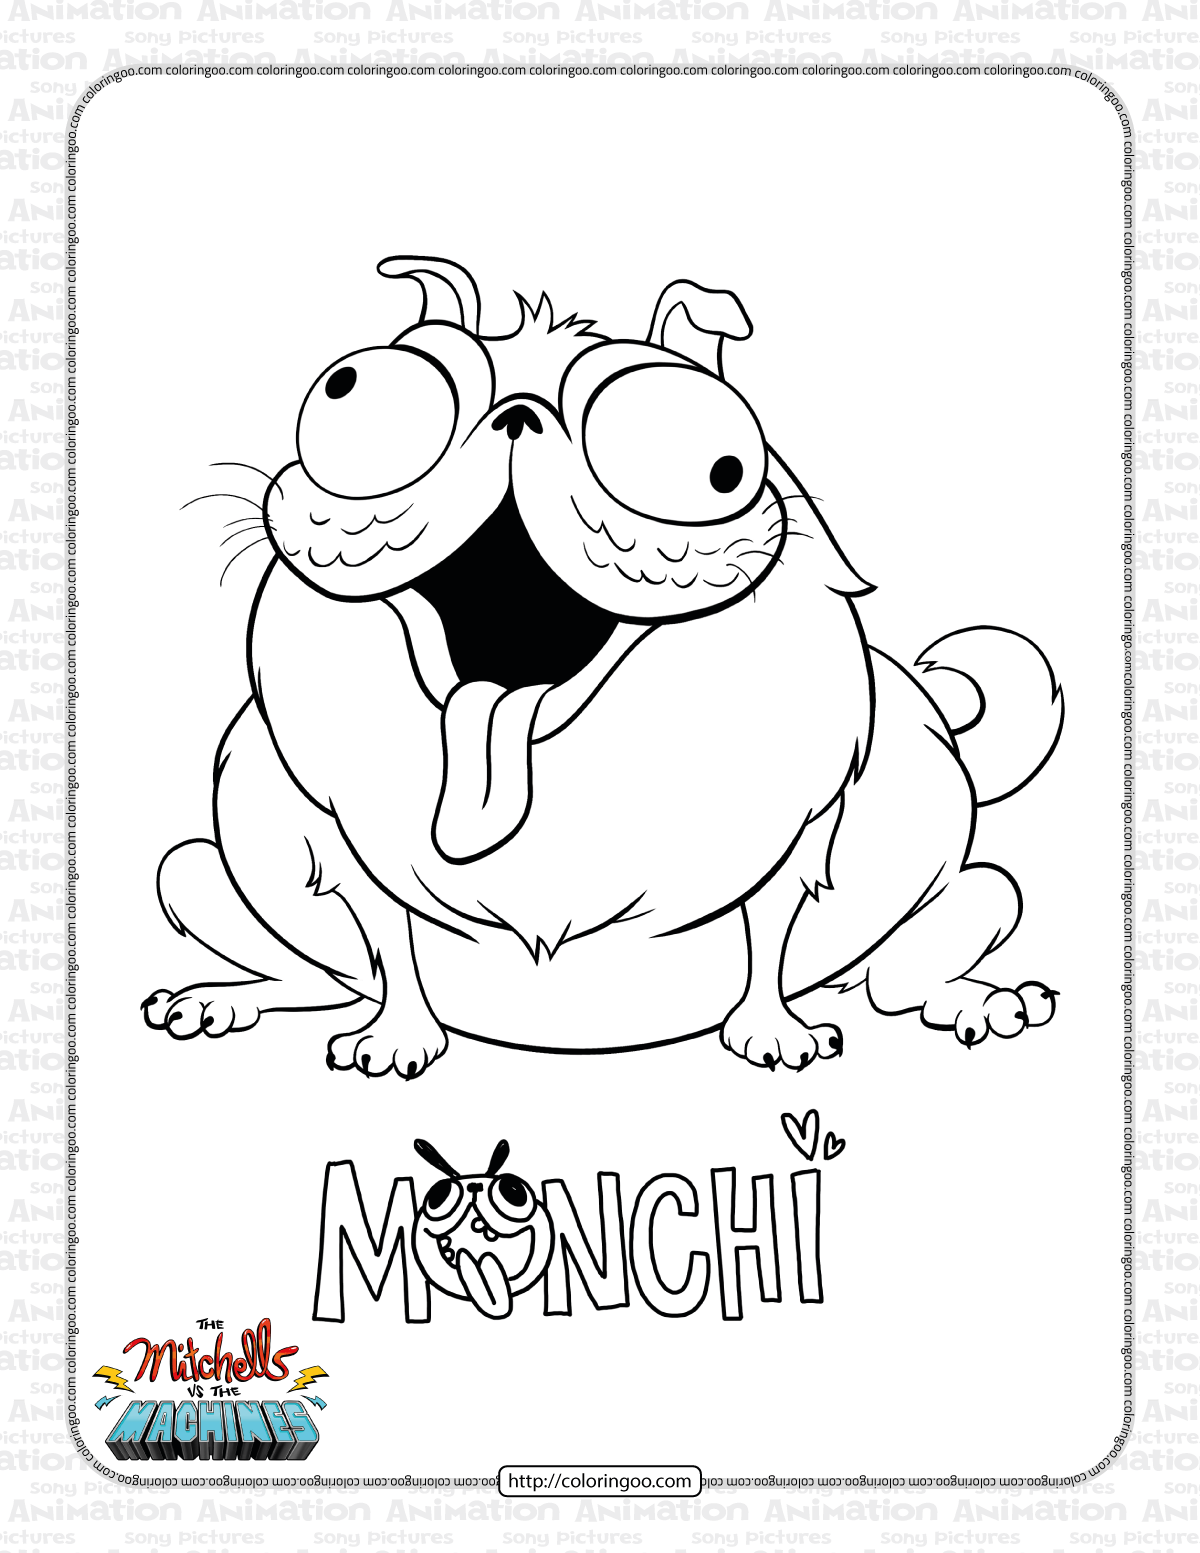 the mitchells vs the machines monchi coloring page